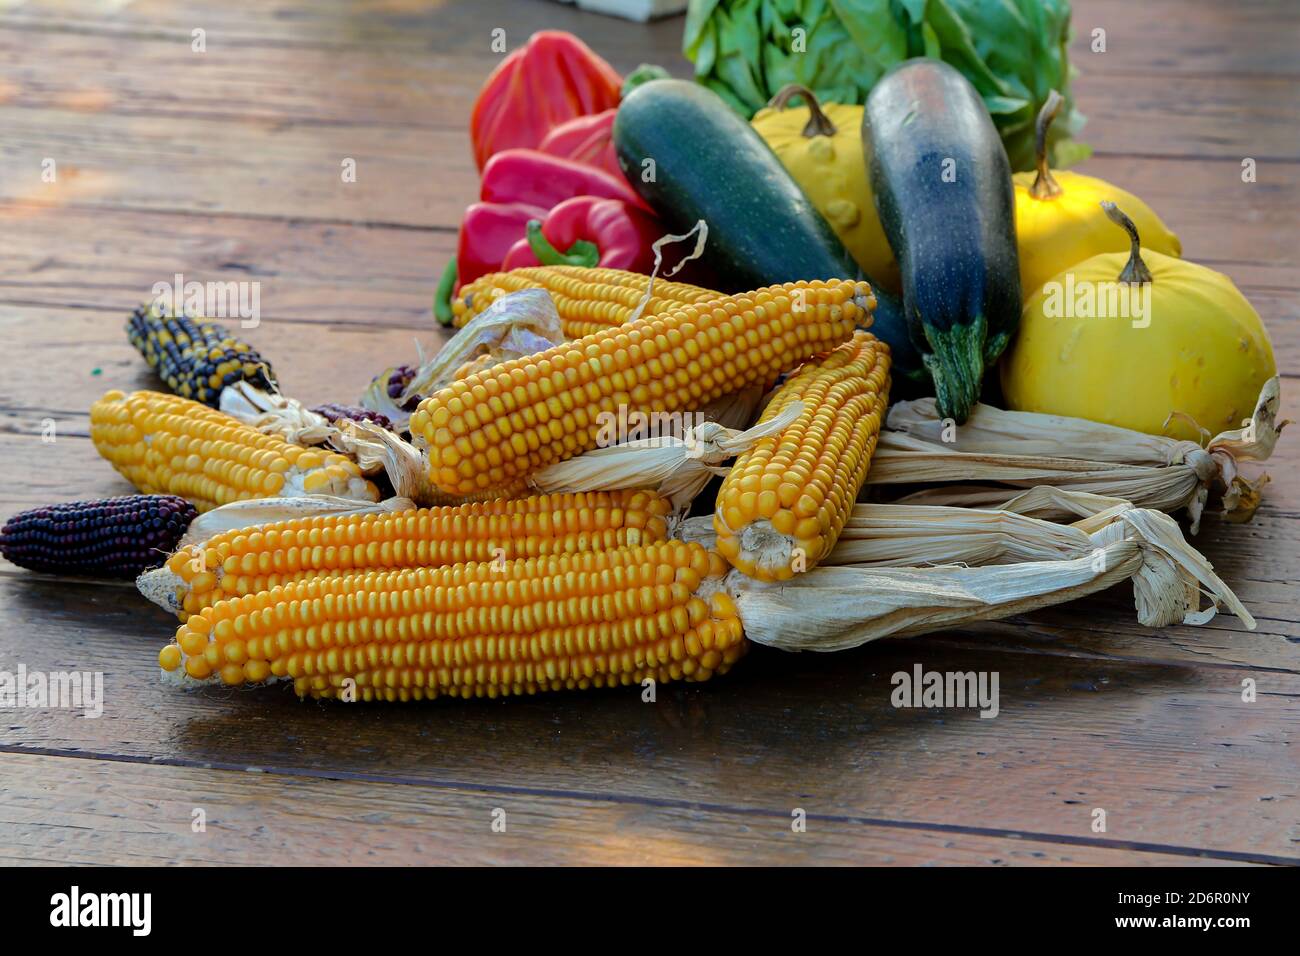 Closeup shot of ripe vegetables on the table Stock Photo